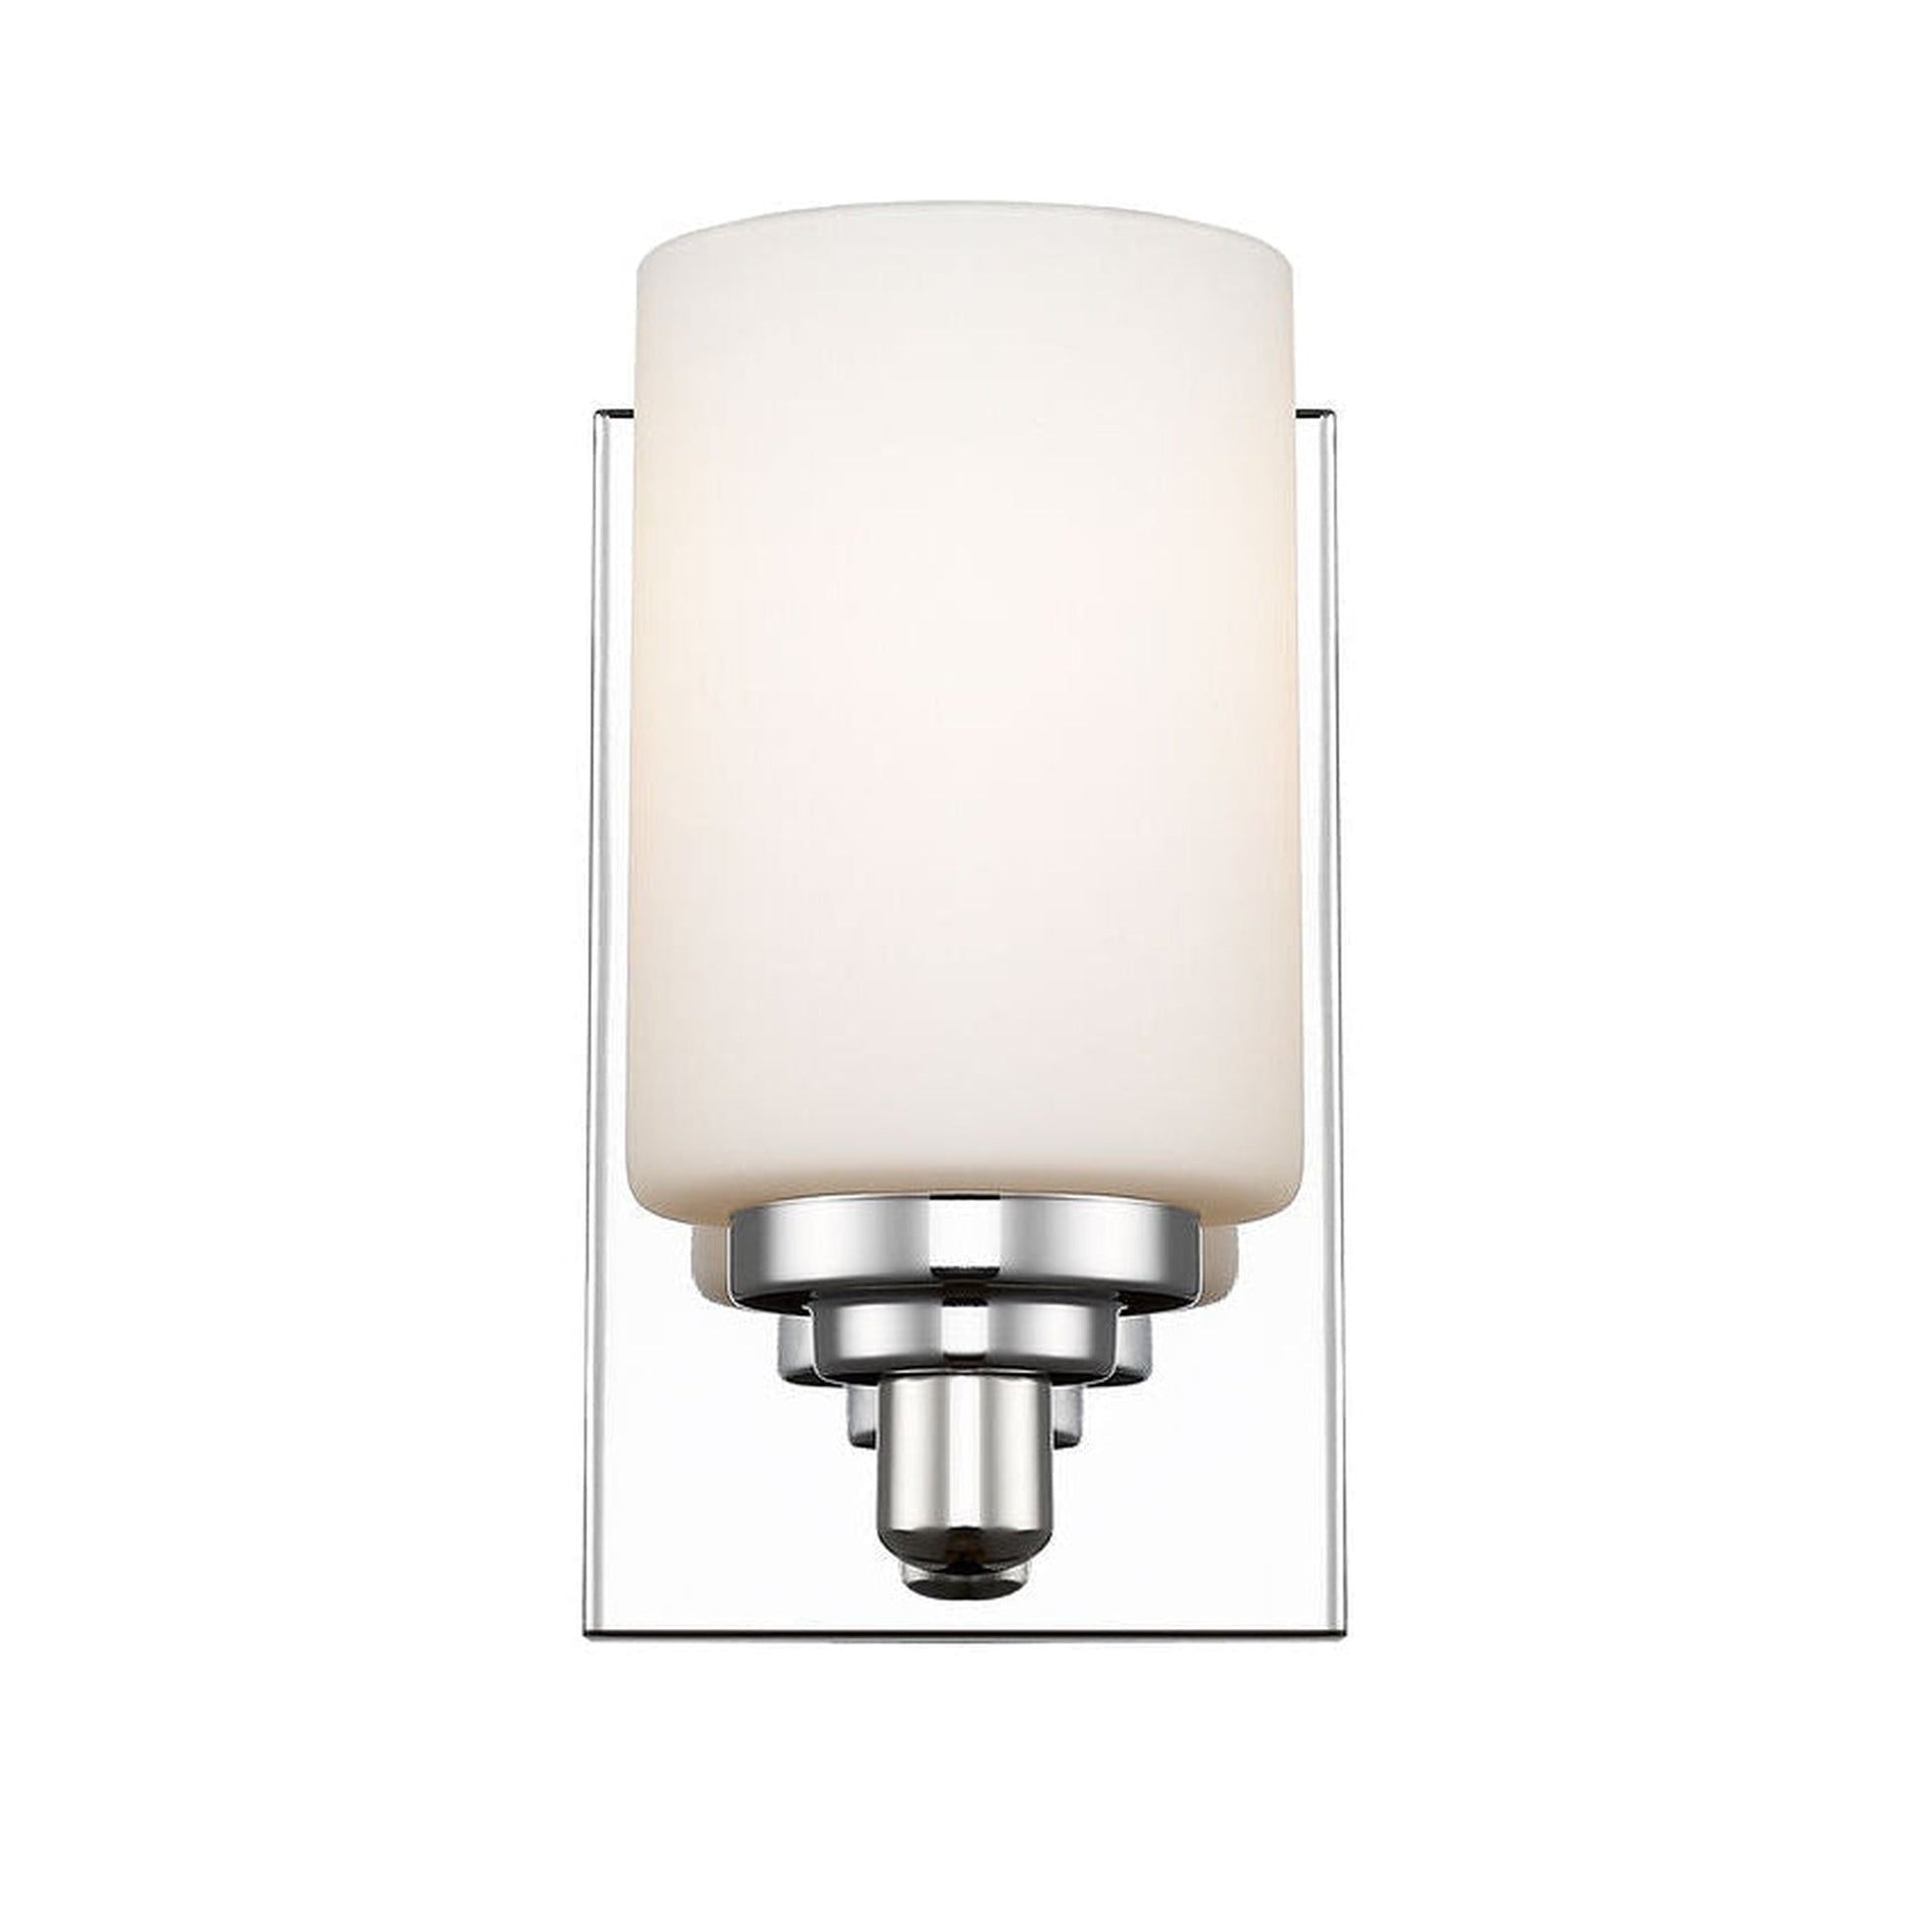 Z-Lite Soledad 5" 1-Light Chrome Wall Sconce With White Glass Shade